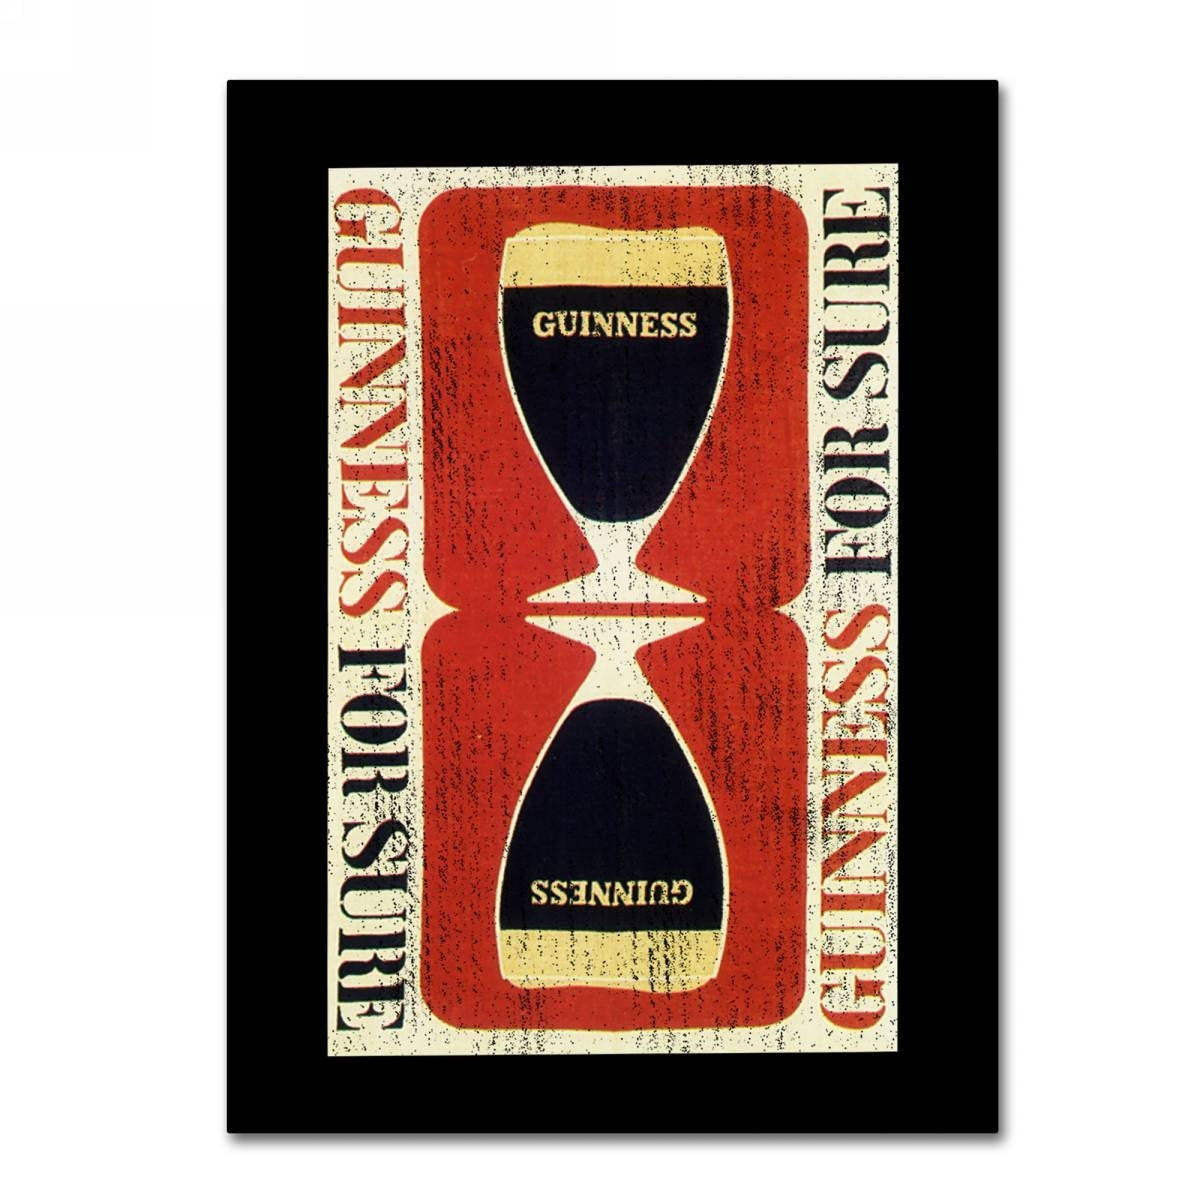 A minimalist Guinness canvas art poster featuring the iconic word "Guinness".